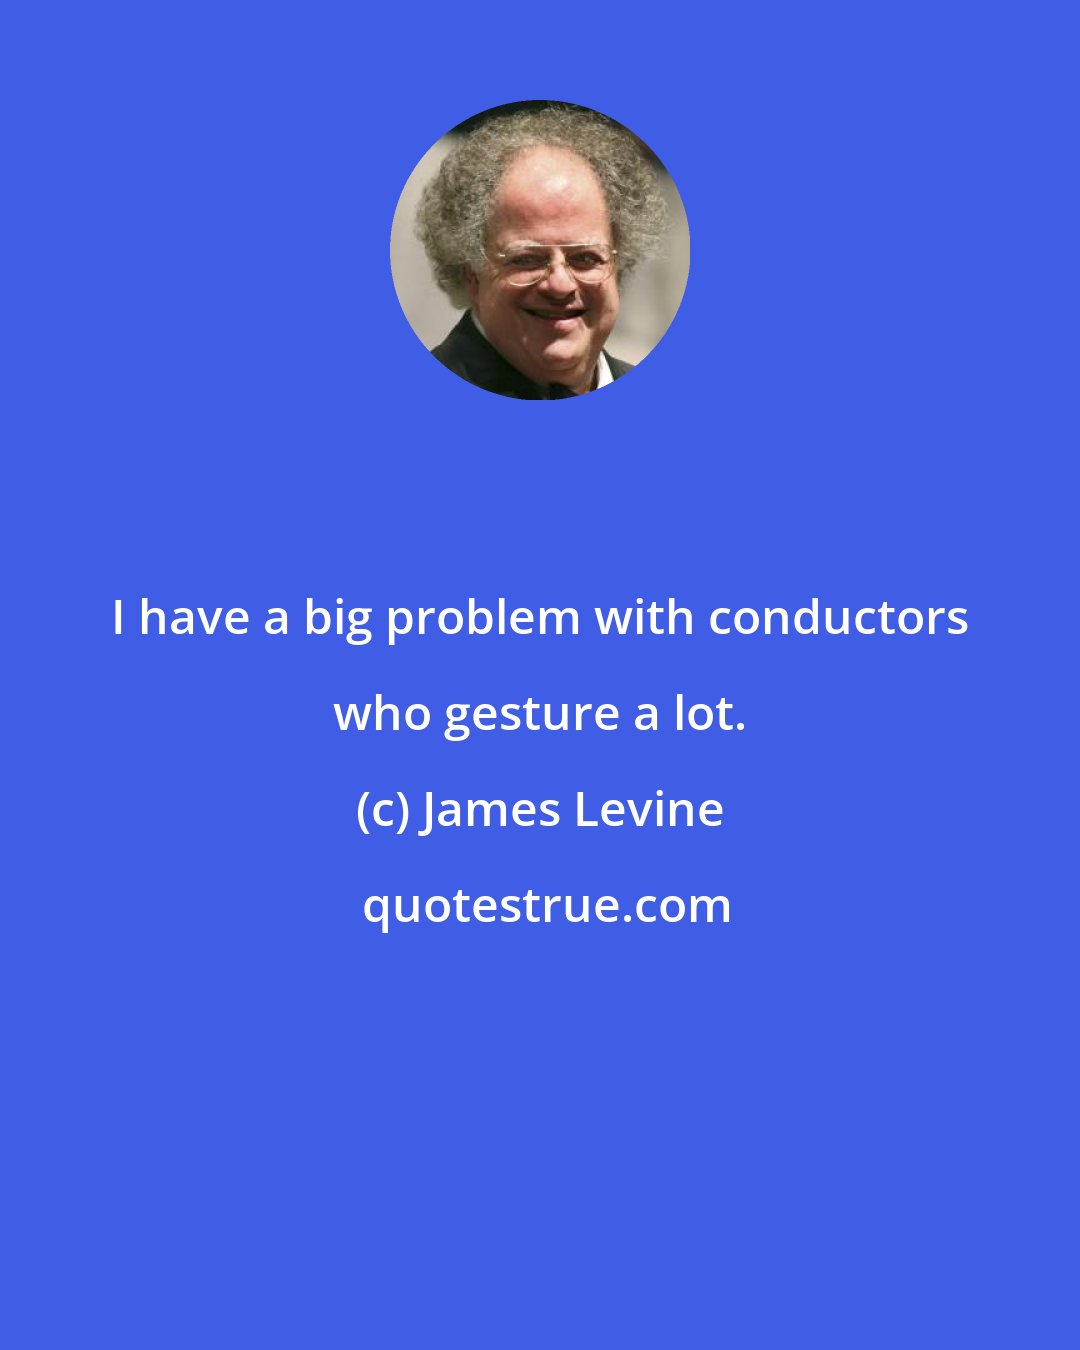 James Levine: I have a big problem with conductors who gesture a lot.